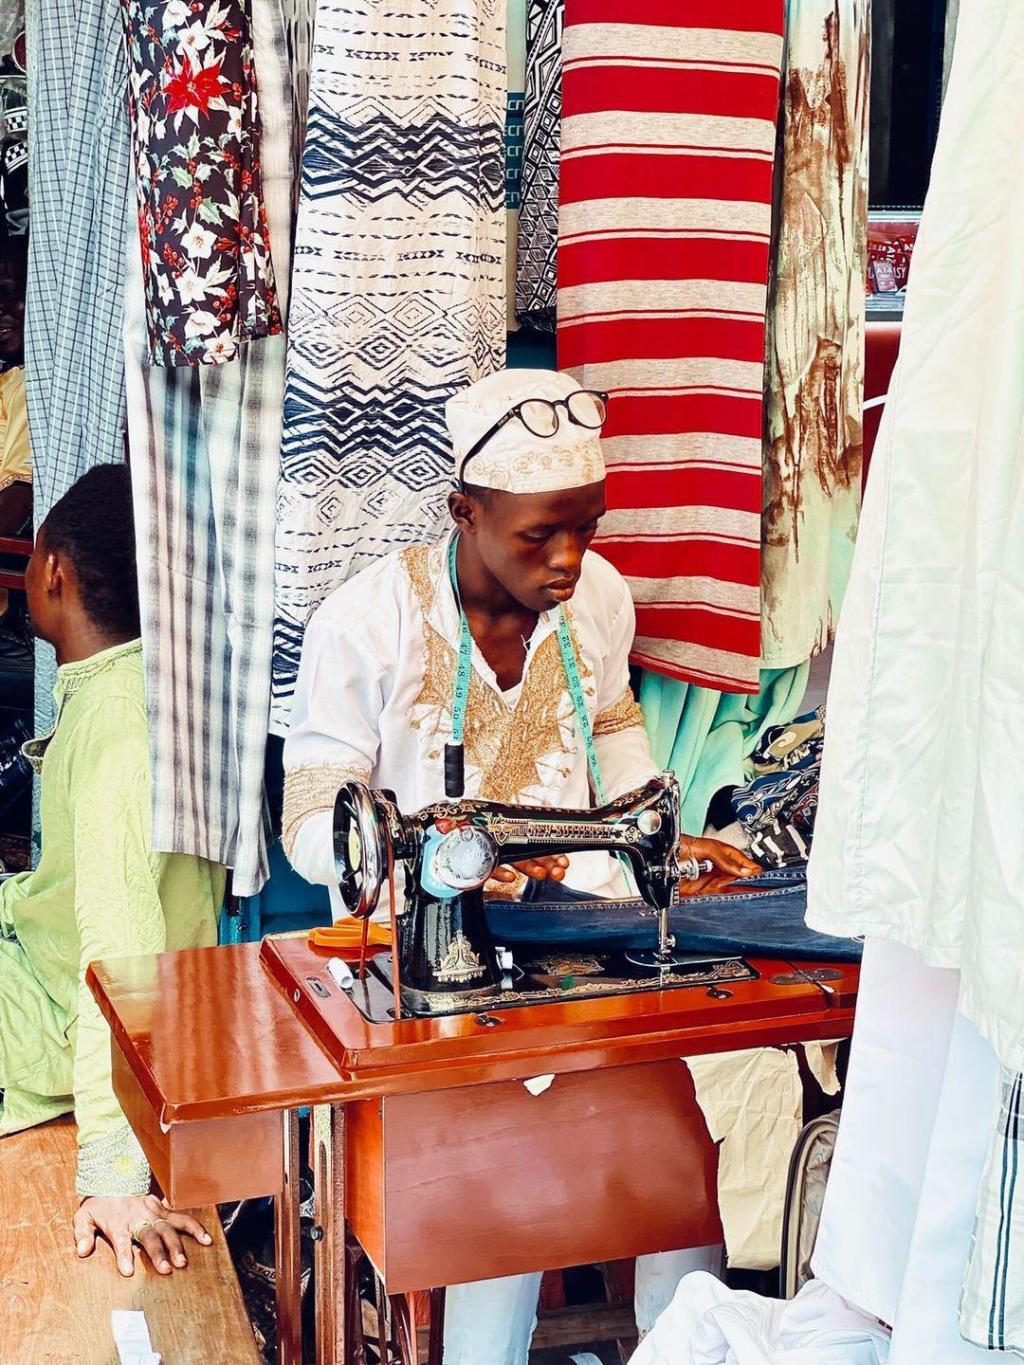 A Tale of Threads in Salone.